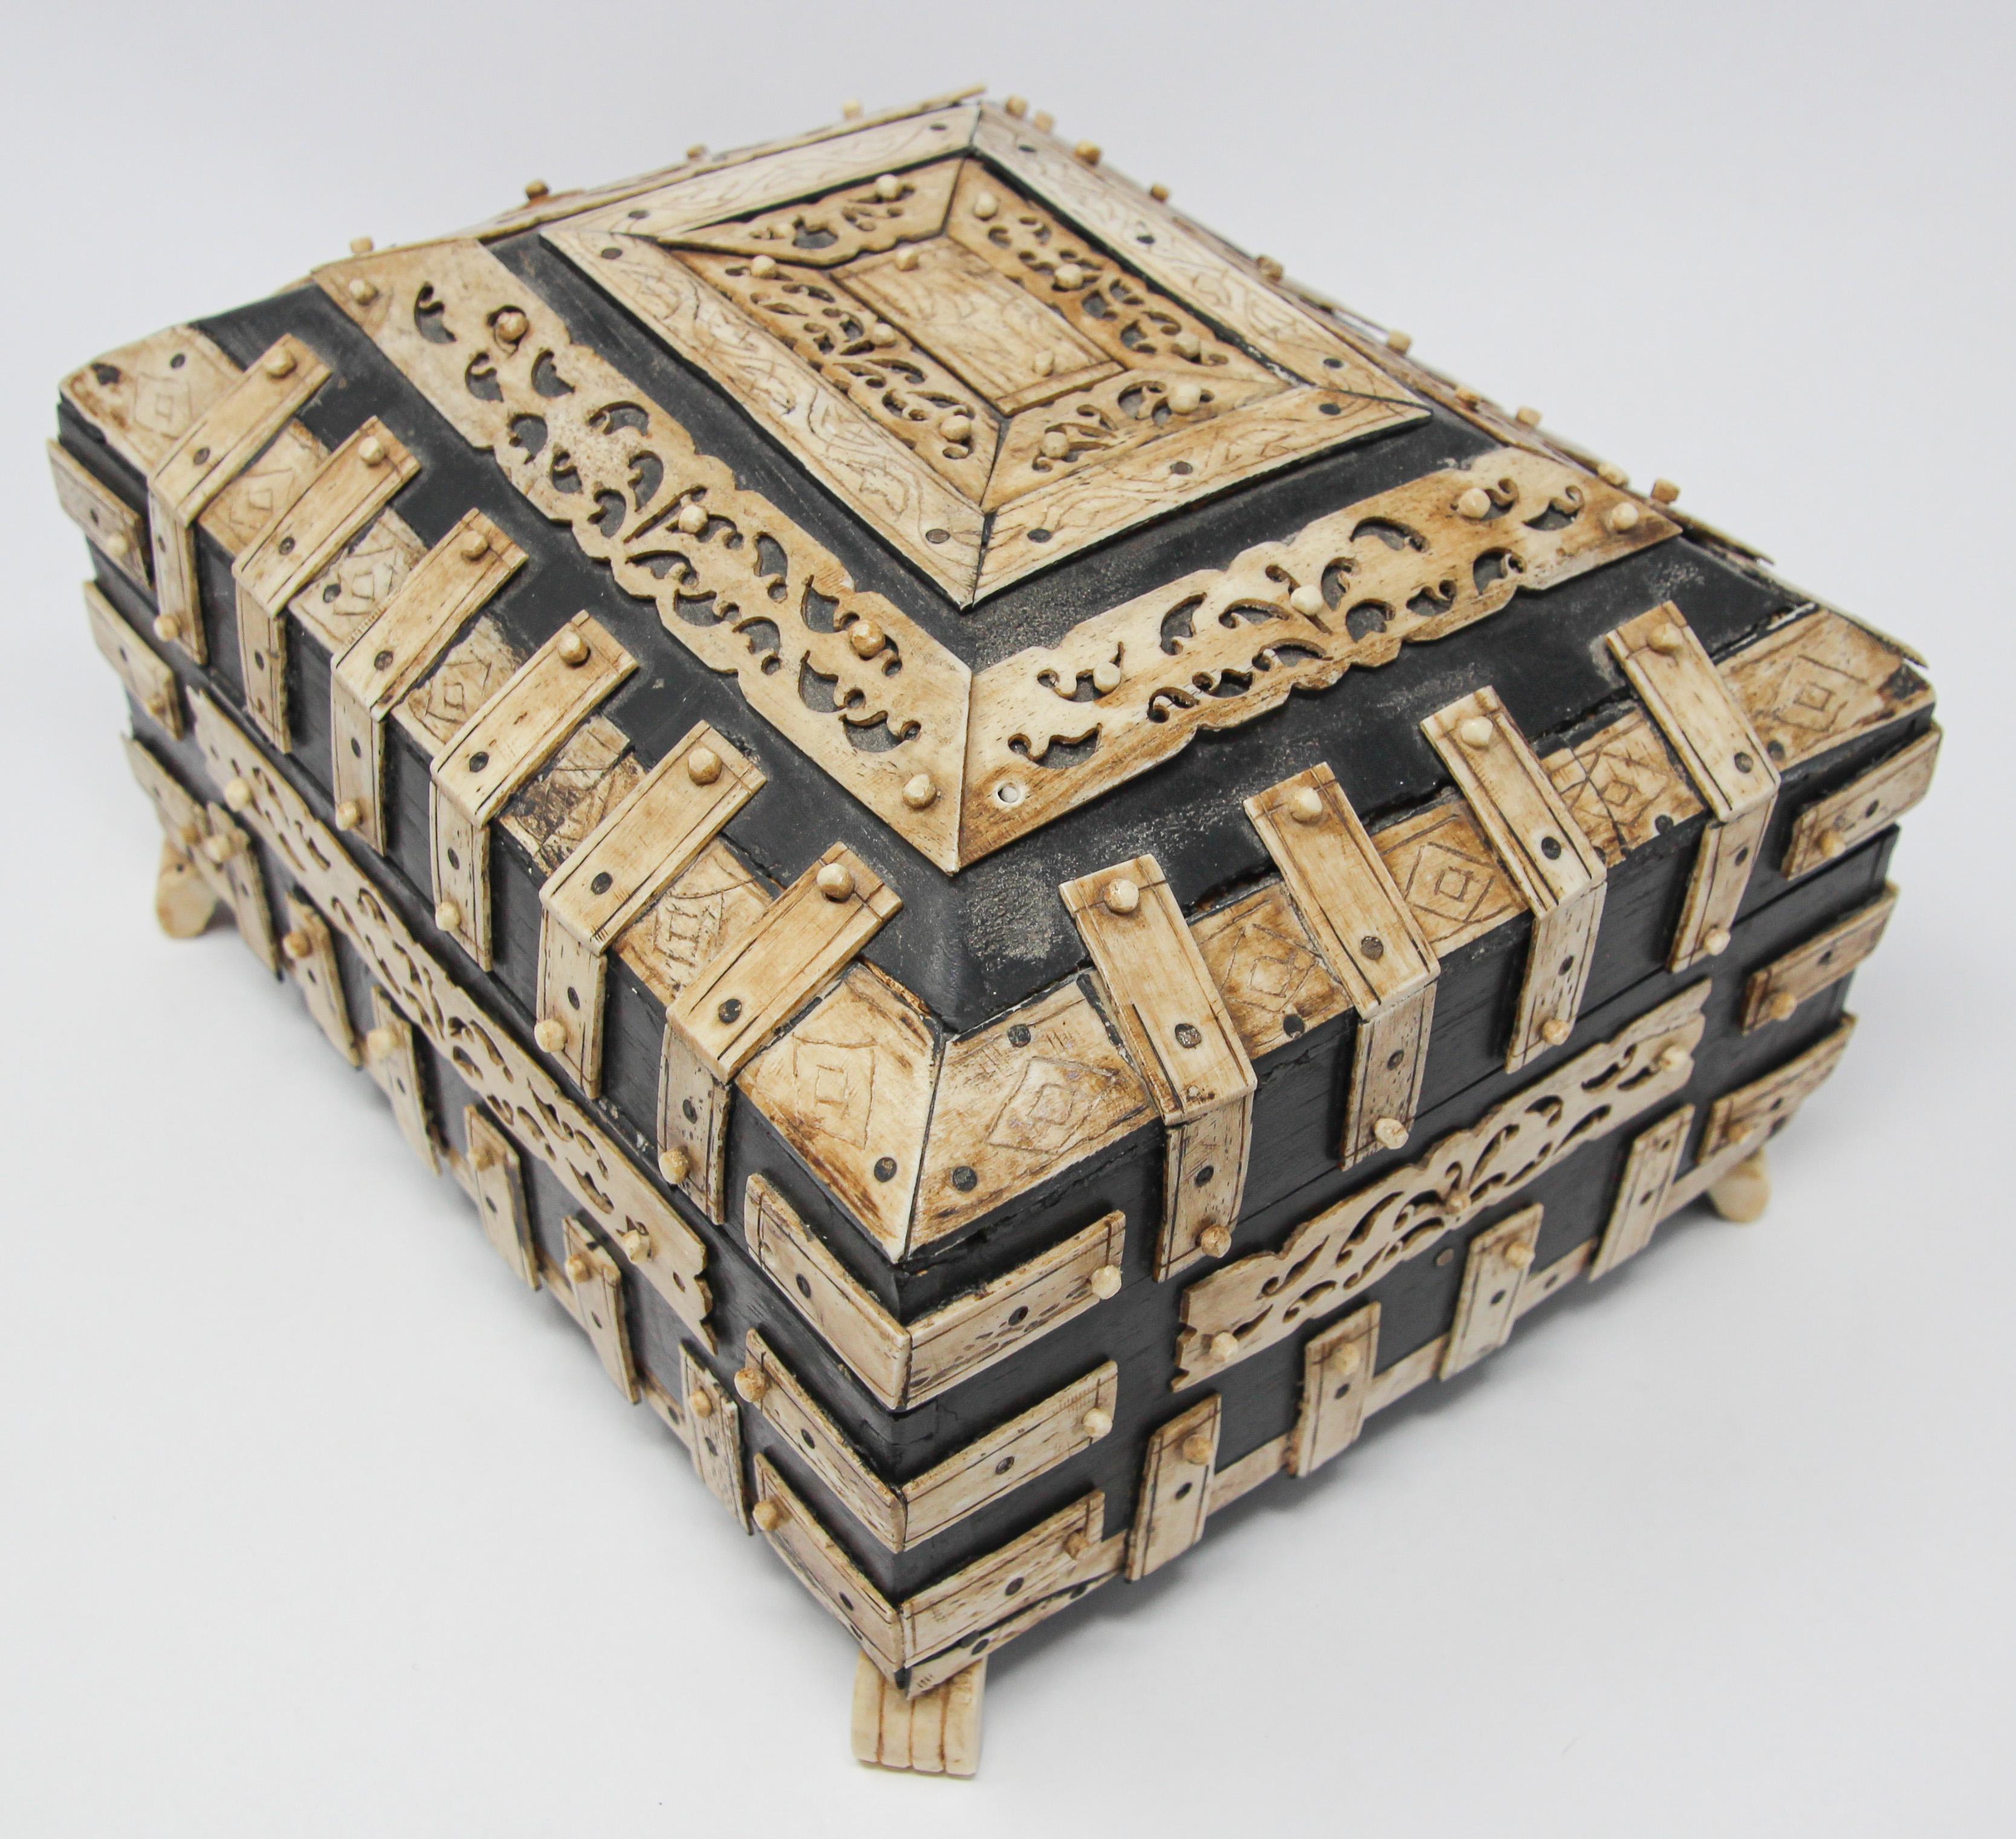 Antique 19th c. Decorative Anglo-Indian Overlay Footed Box with Engraved Bone For Sale 5